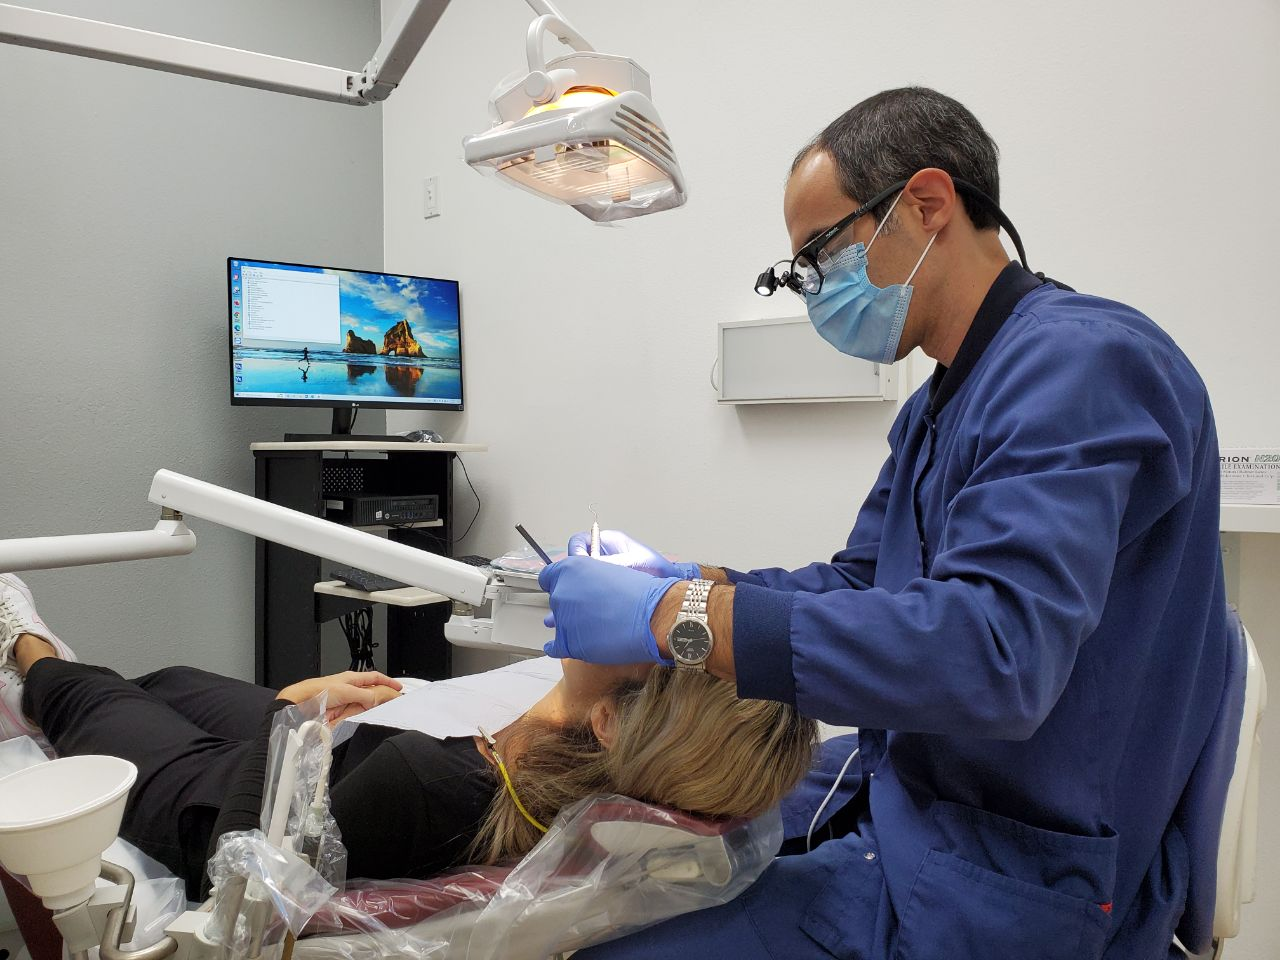 A dentist from All Smiles Family Dentistry is transforming a patient's smile with dental veneers